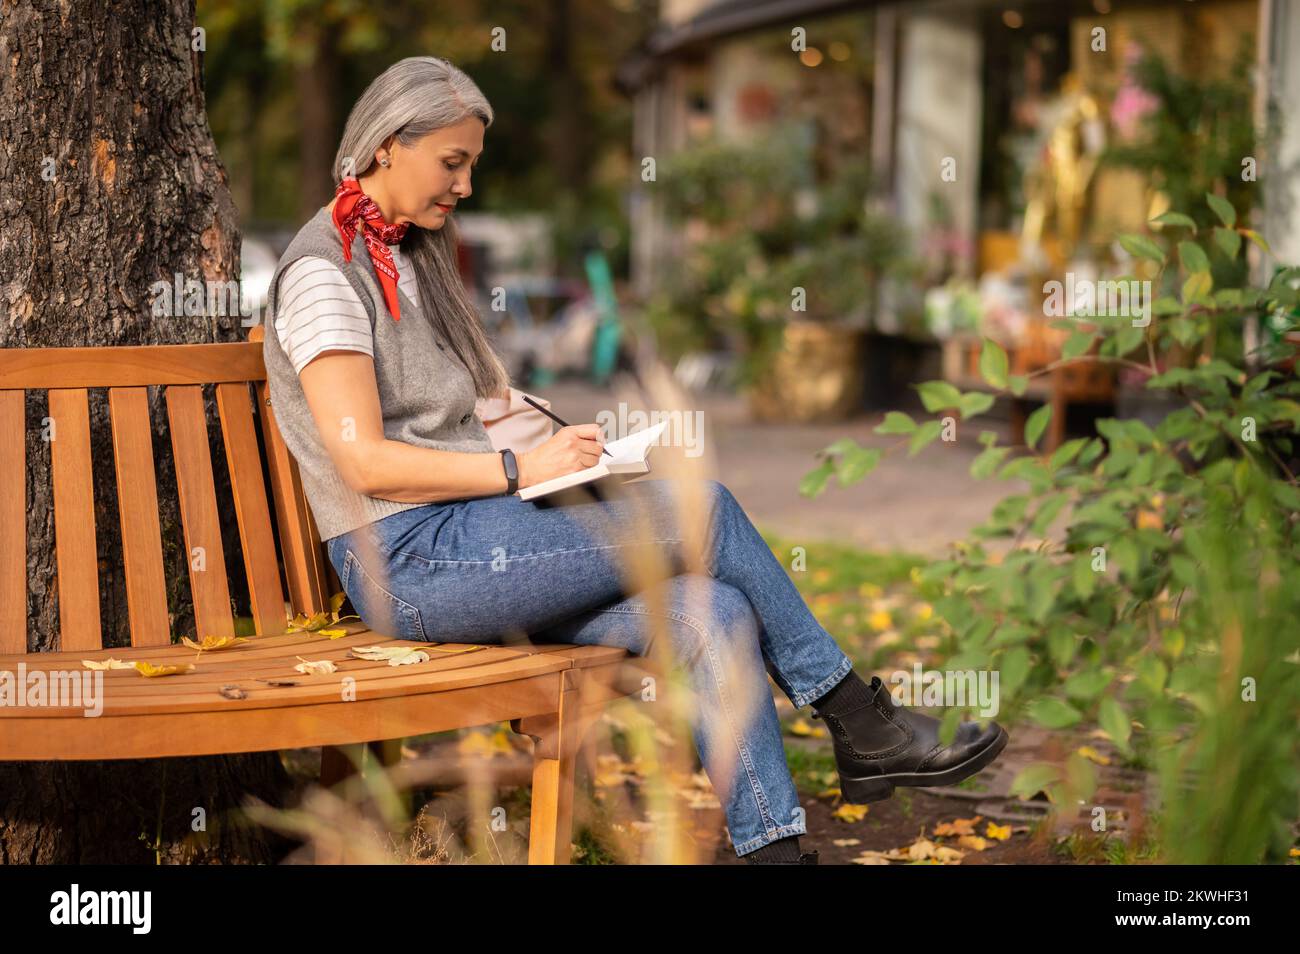 Woman sitting on a bench with a notebook in and looking involved Stock Photo